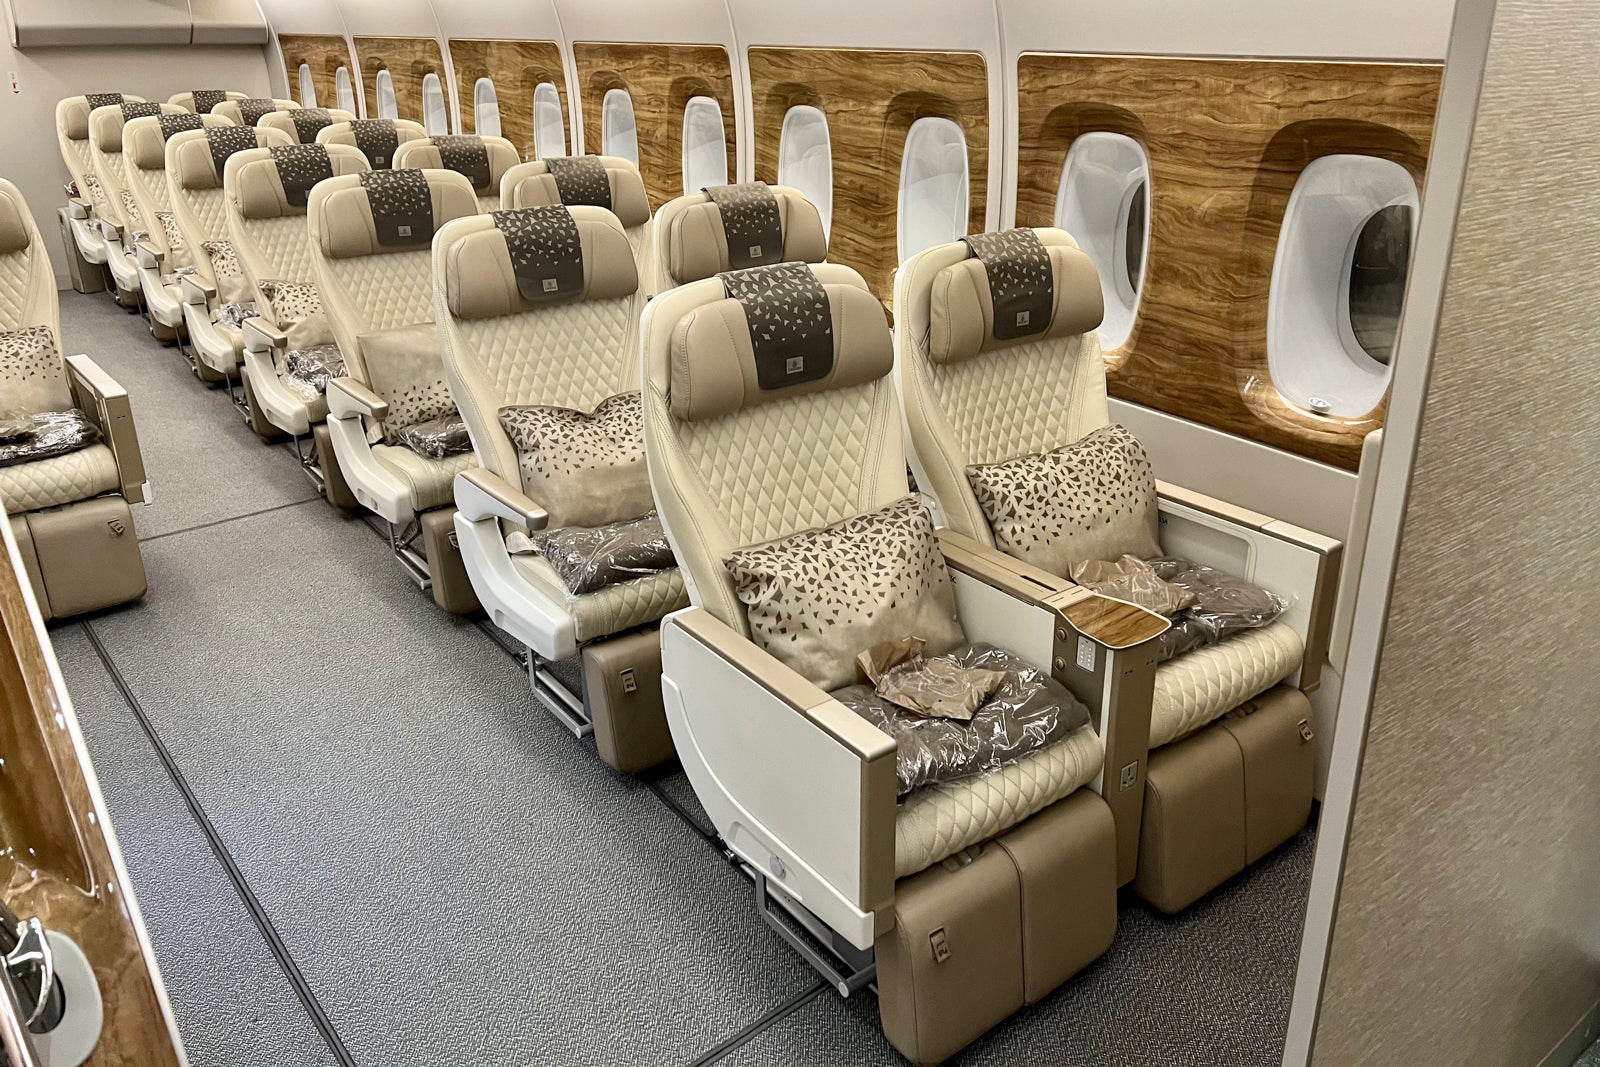 Emirates is bringing its new premium economy experience to the US The